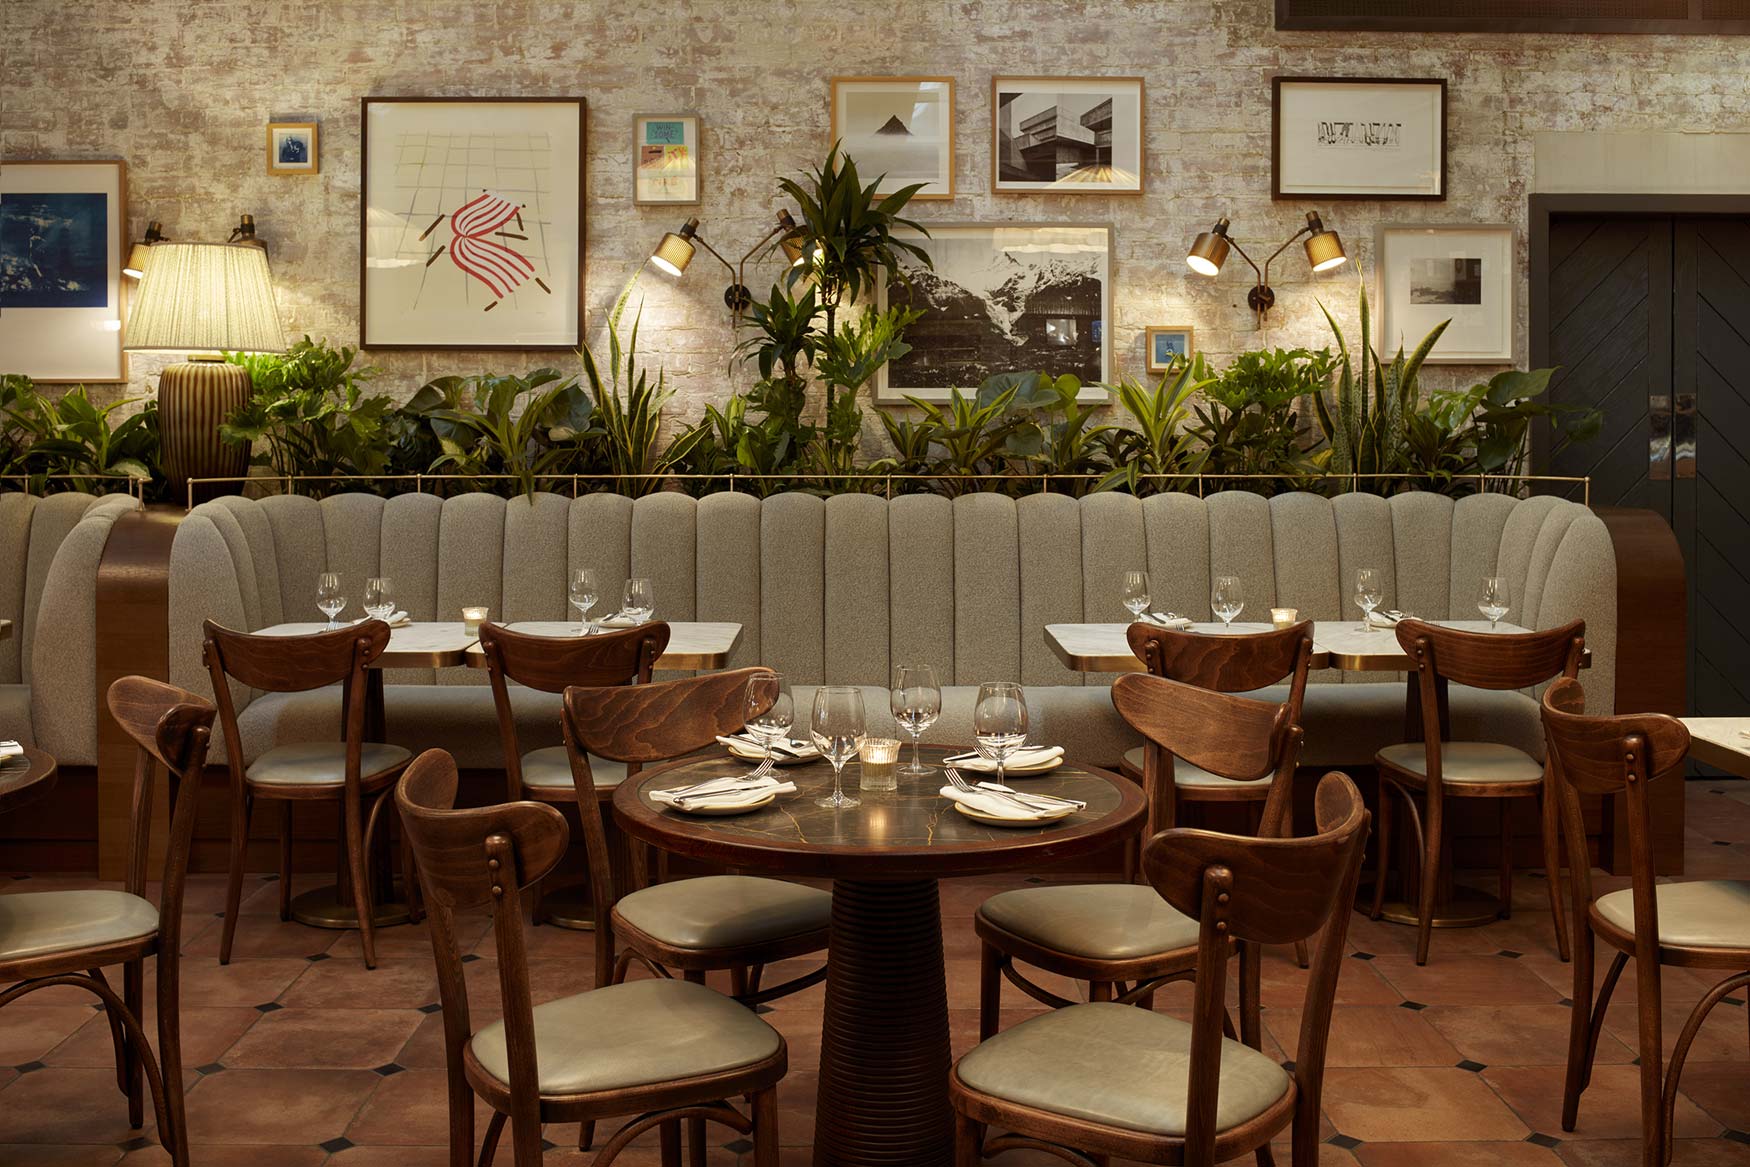 Interior of Rondo restaurant at the Holborn hotel showing tables and plants